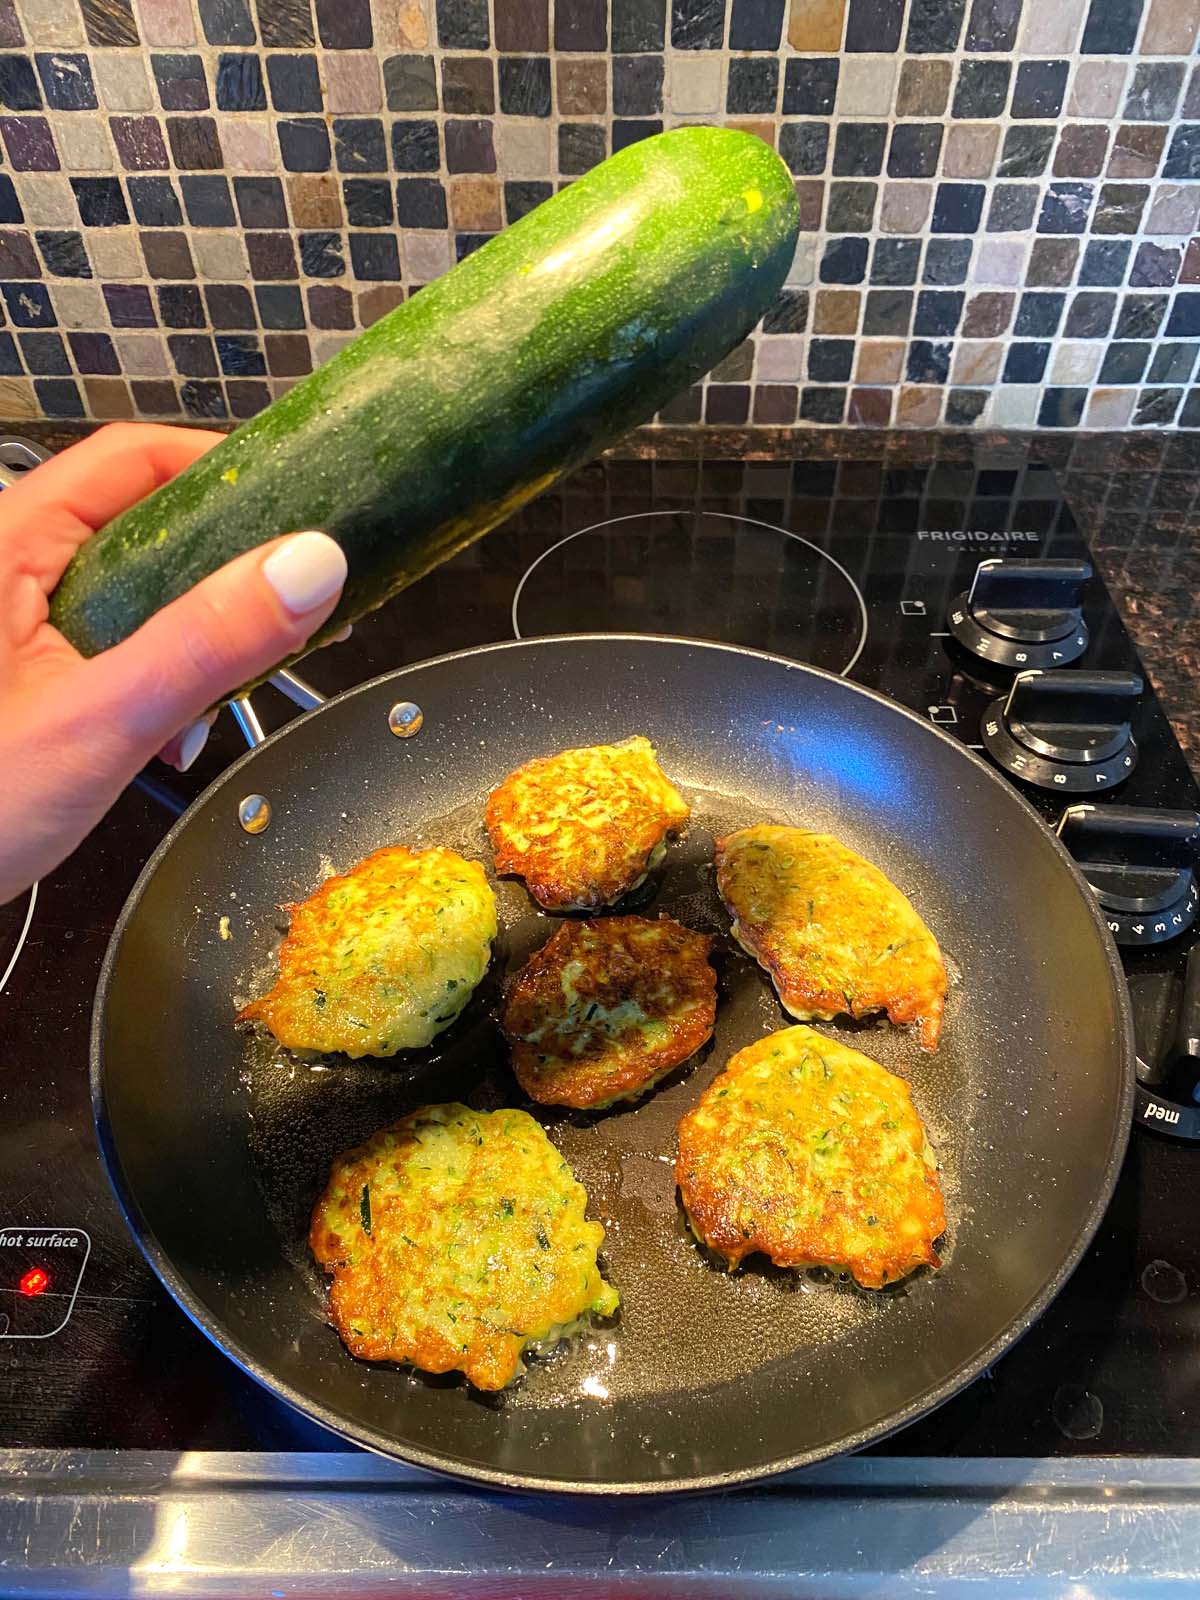 Zucchini pancakes in a frying pan with a raw zucchini being held up.